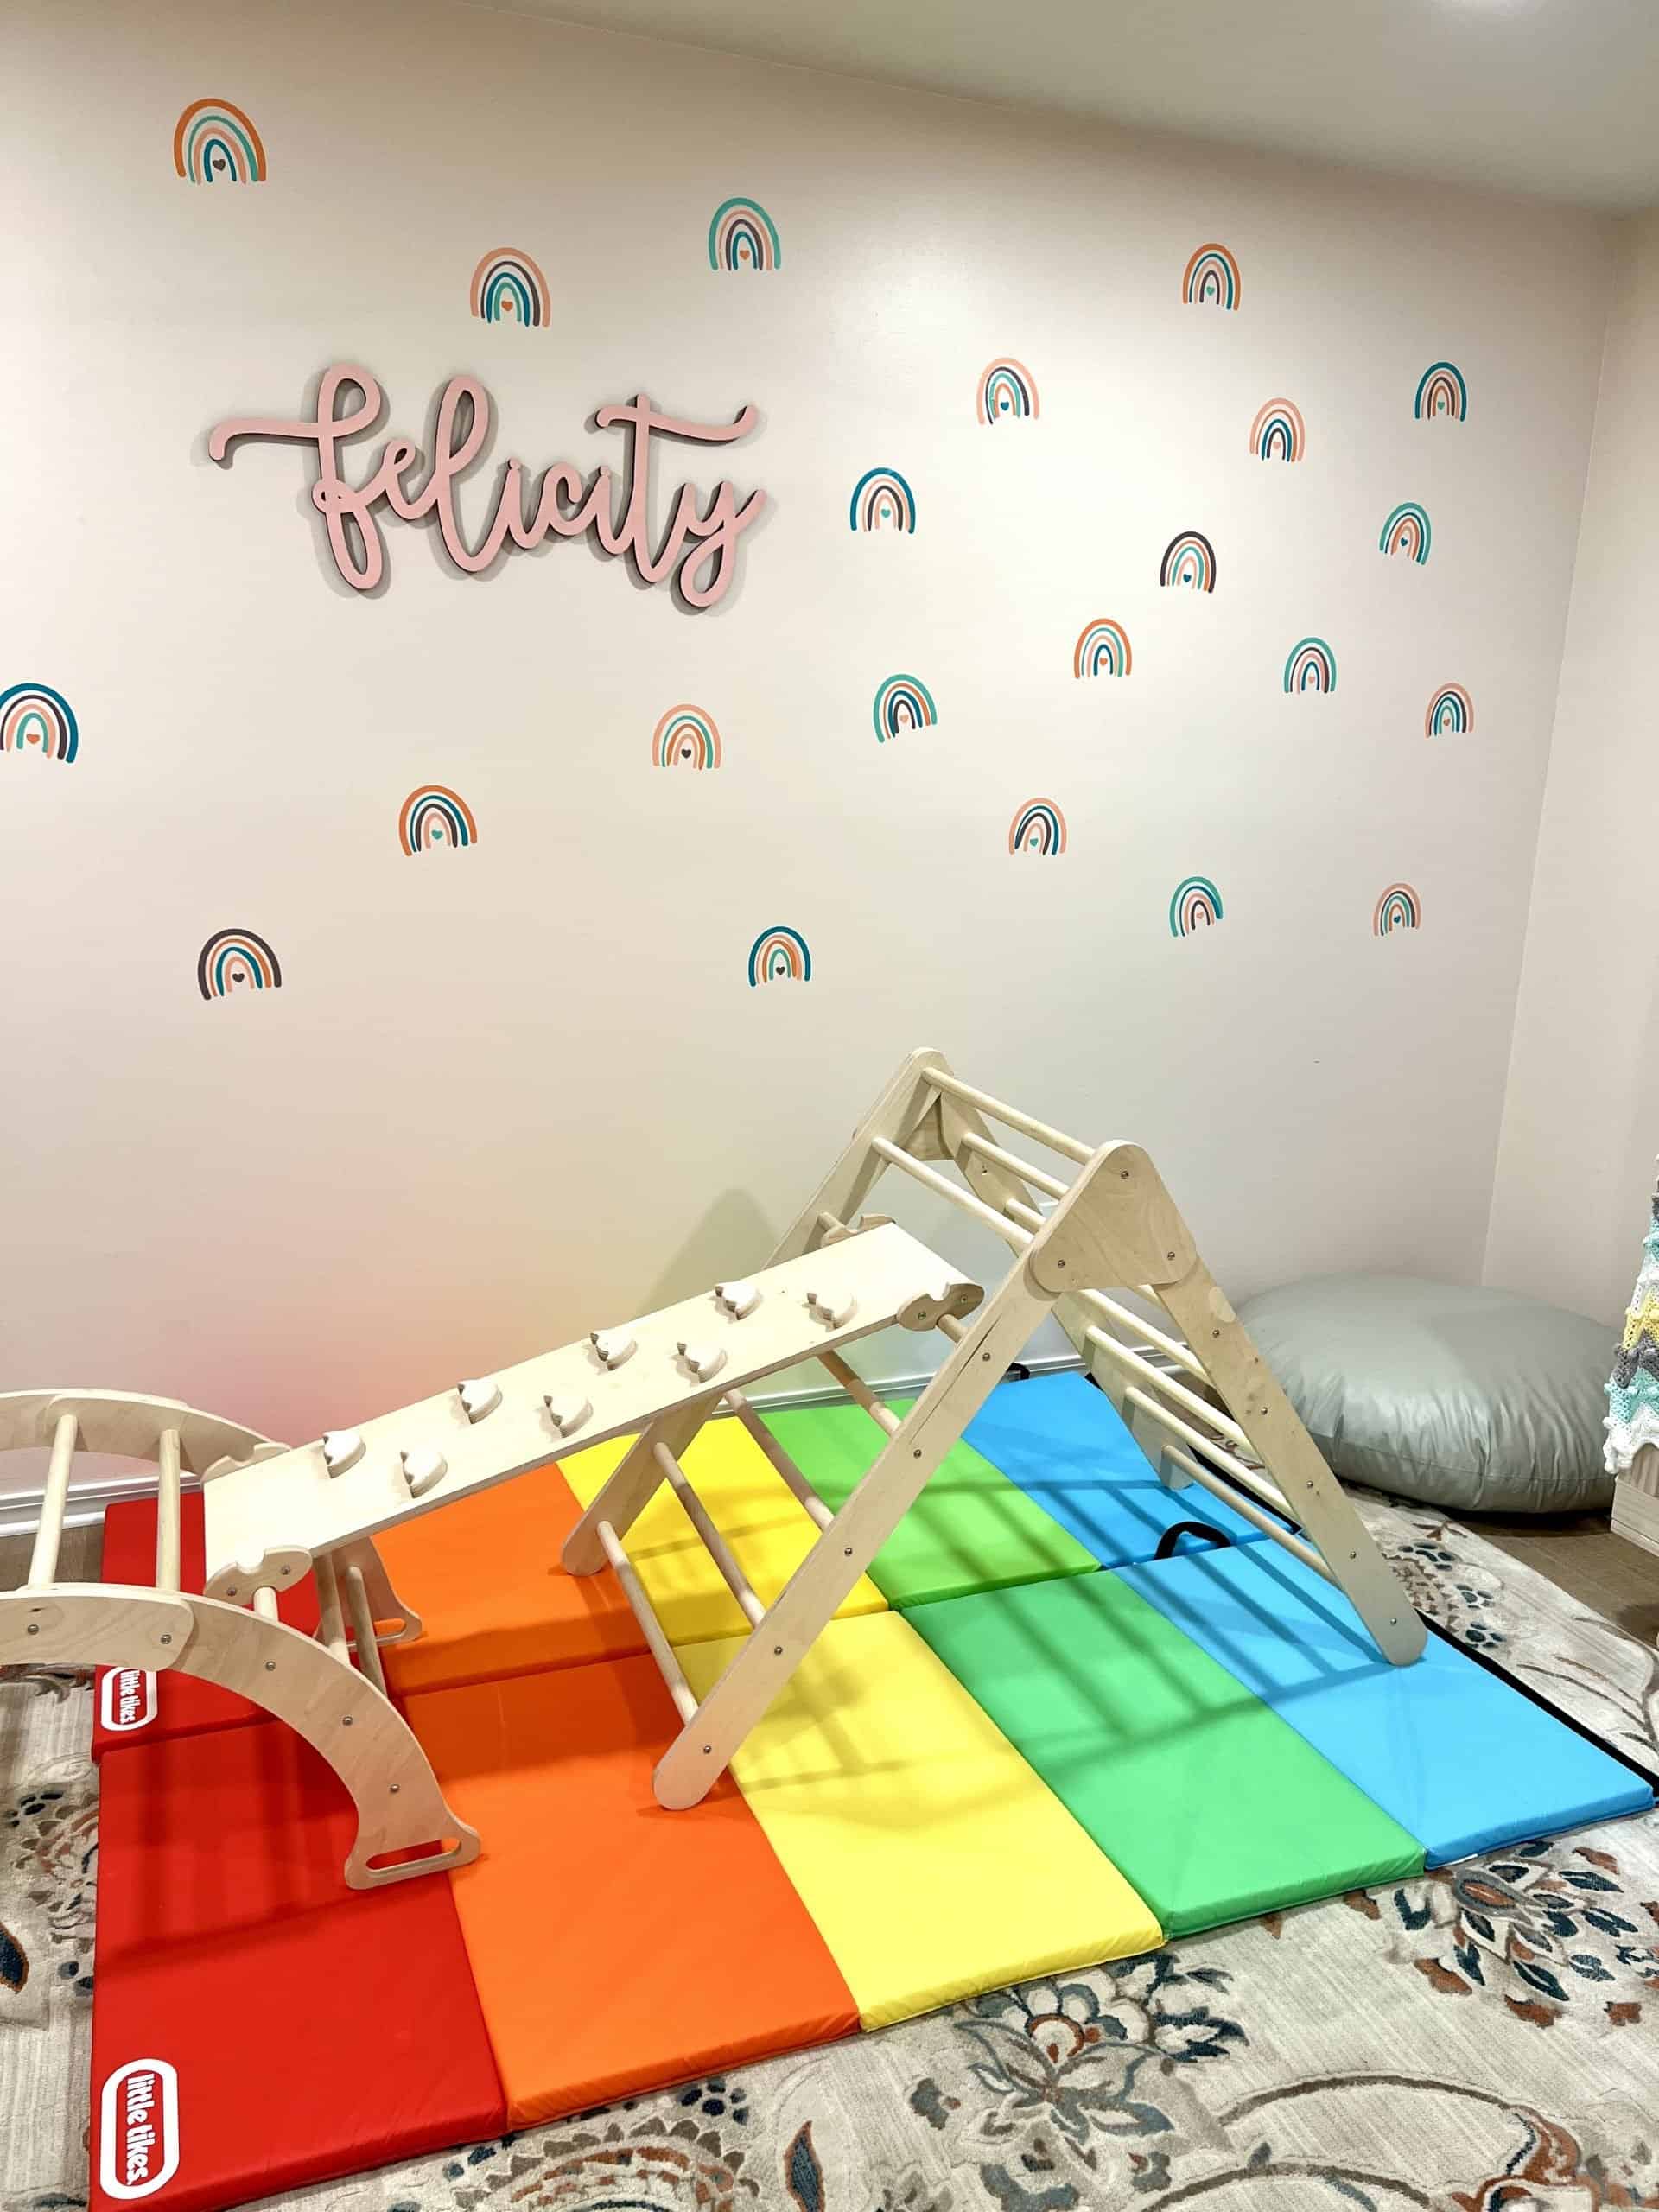 Let's get inspired to customize our homes with Cricut removable vinyl decals. #notsponsored Create that gorgeous trendy wallpaper look without the commitment. Easy DIY Rainbow wall decals, perfect for a nursery, toddler, kid's or teenagers room. 